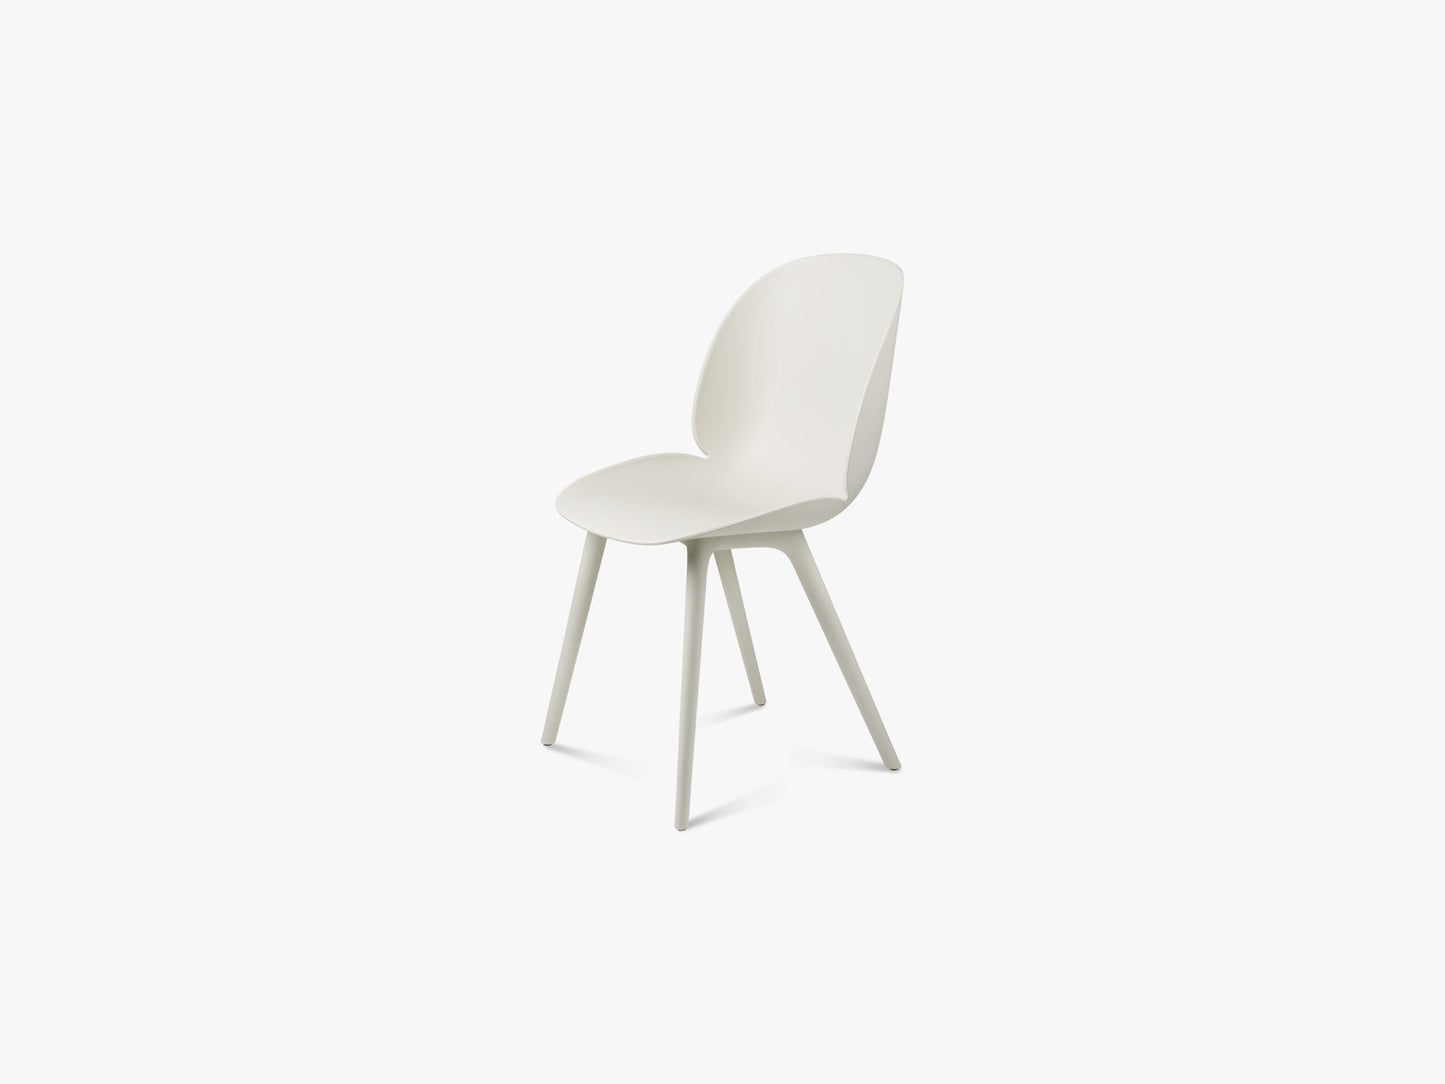 Beetle Dining Chair Un-Upholstered Plastic base, White/White